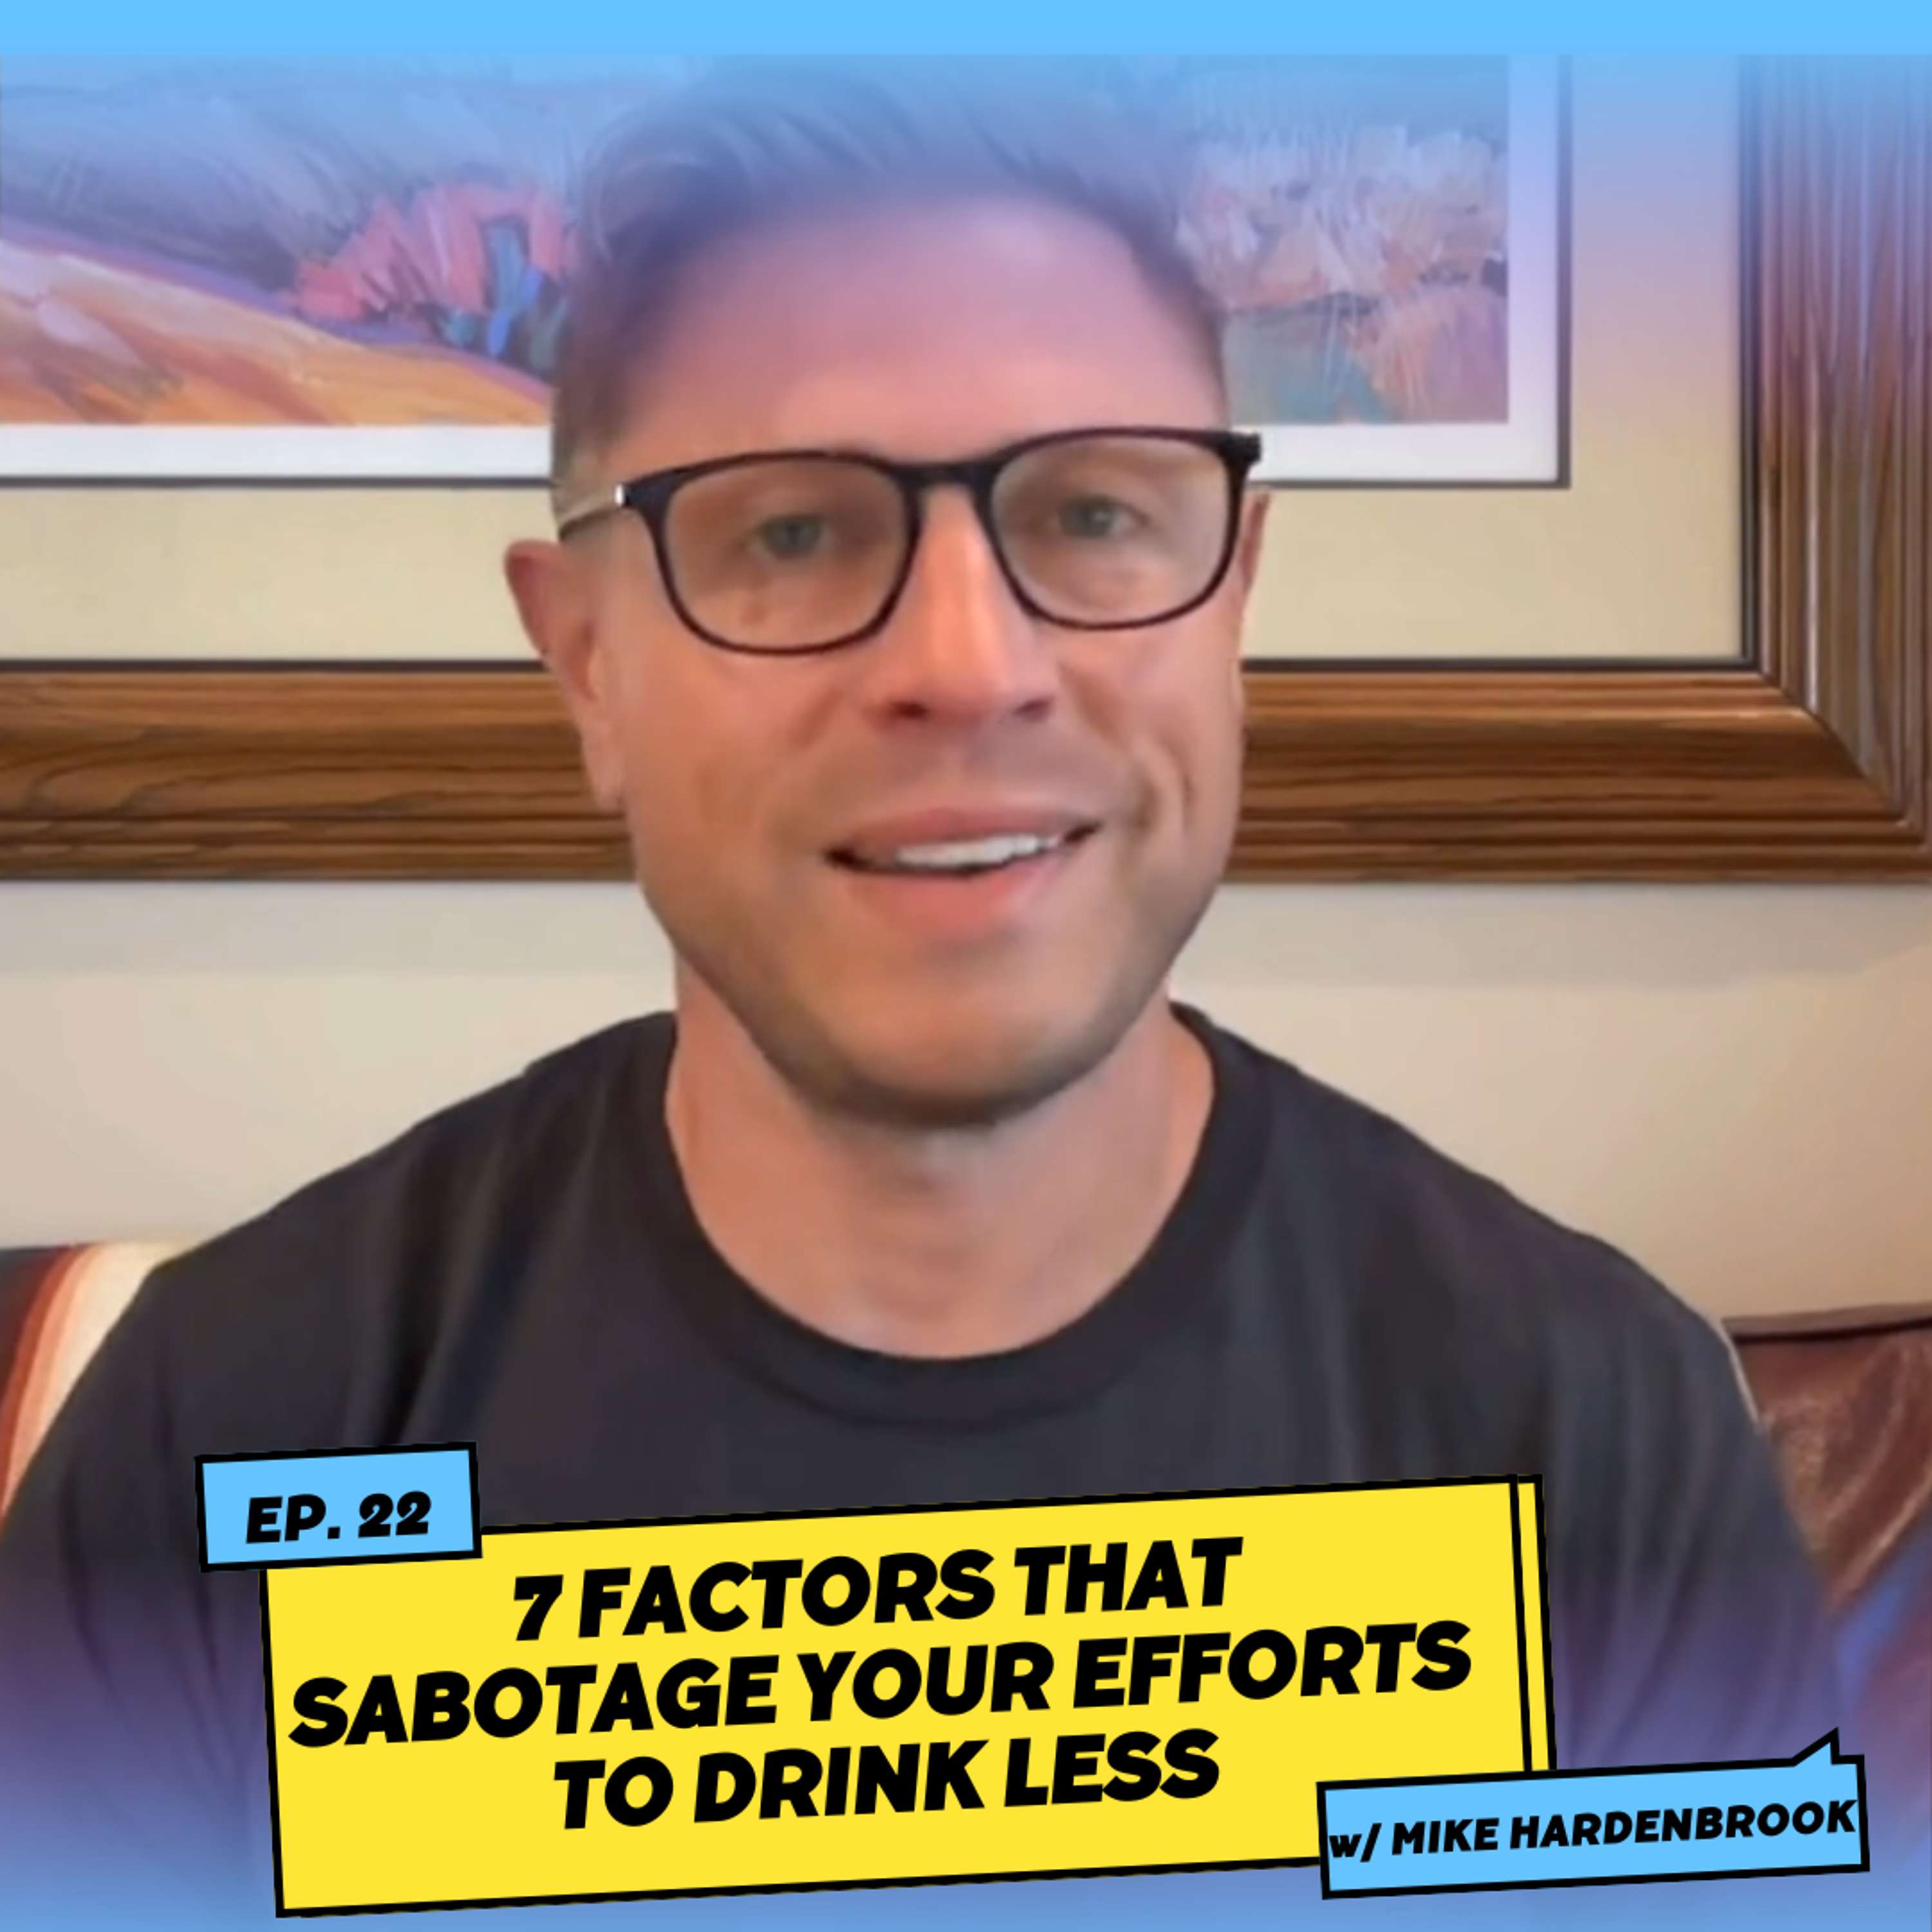 7 Factors That Sabotage Your Efforts to Drink Less